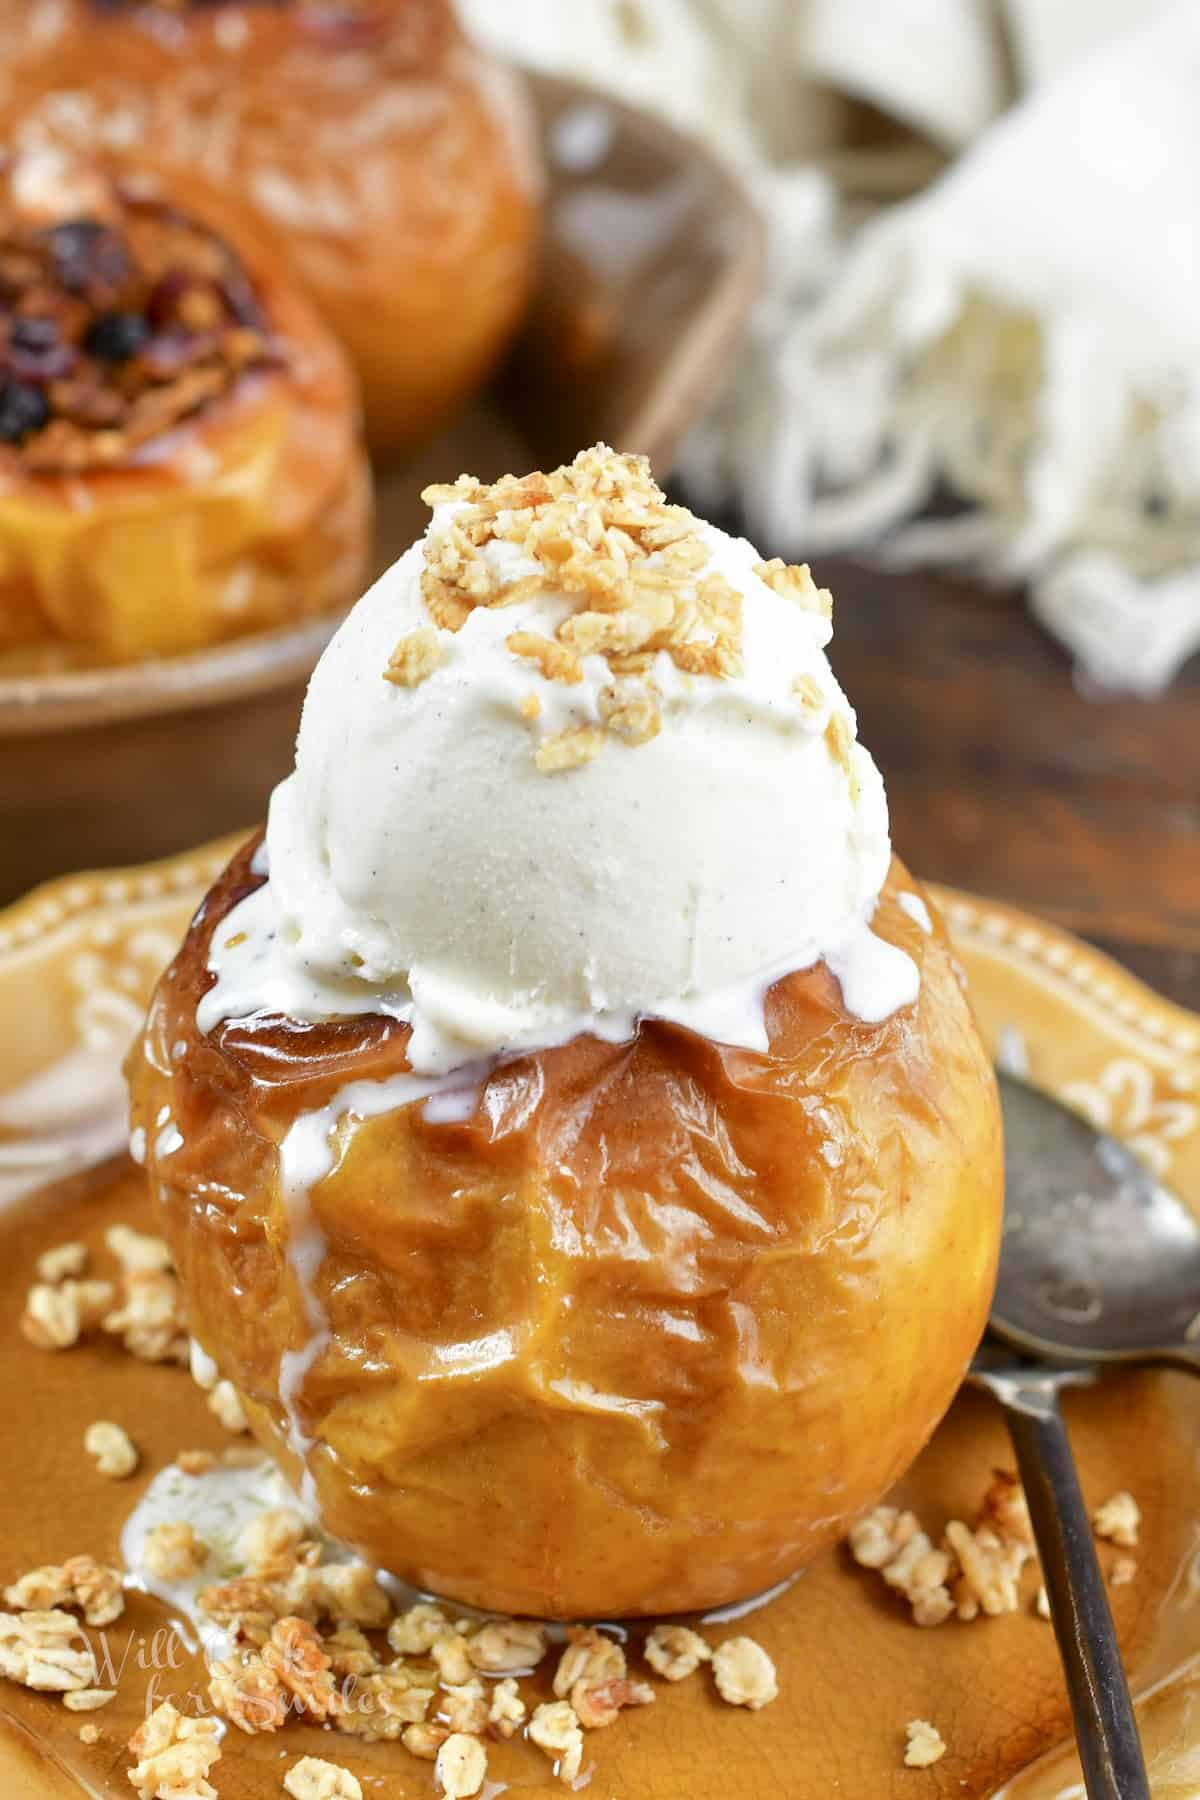 baked apple topped with vanilla ice cream